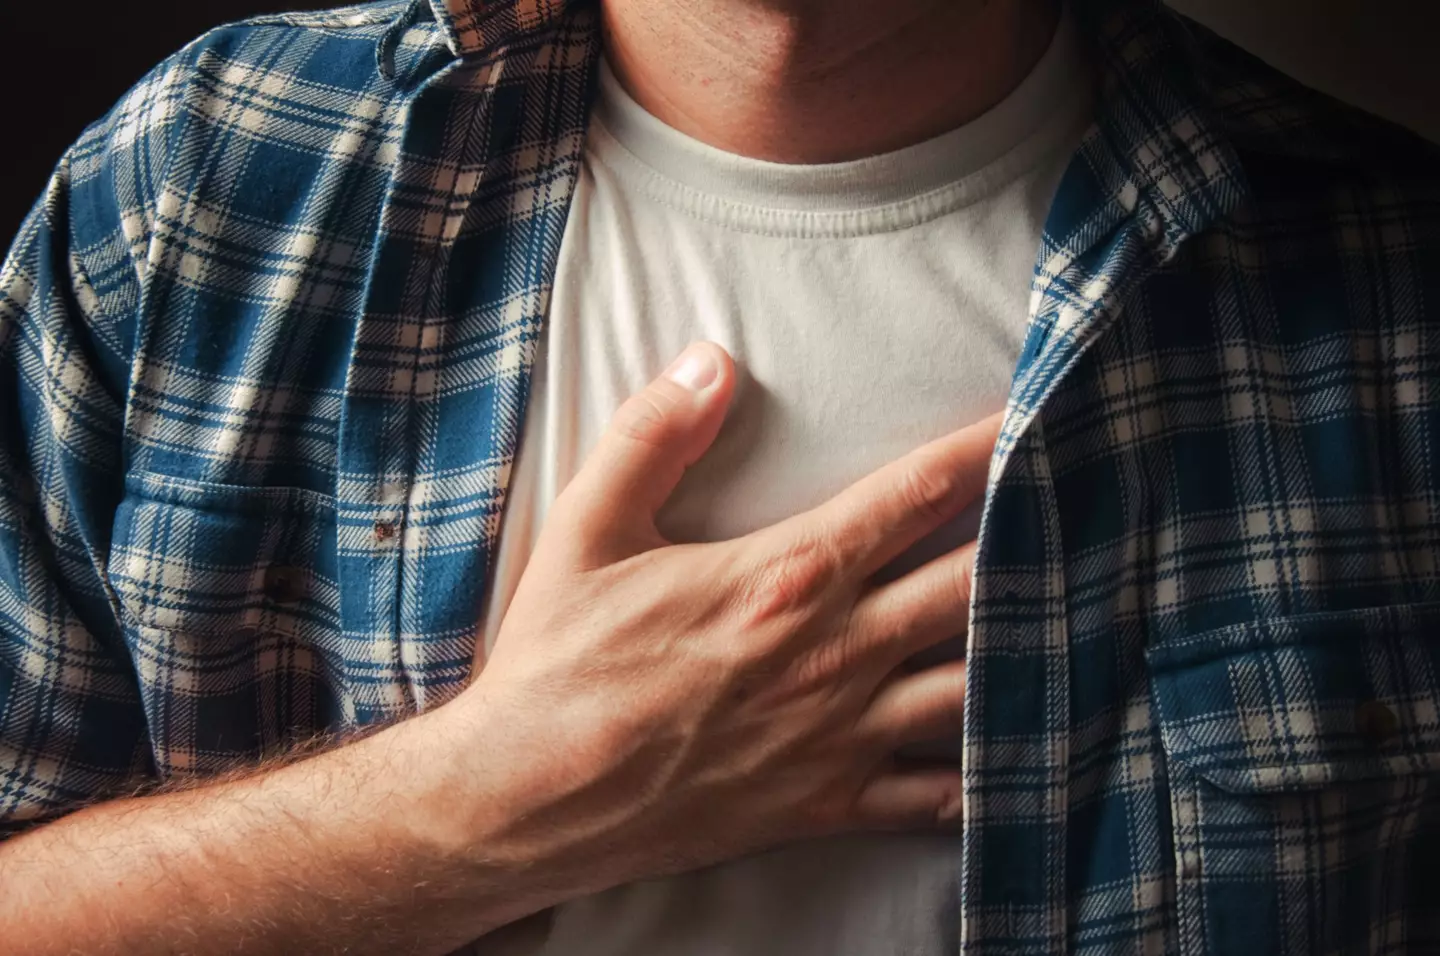 Chest pain isn't always caused by your heart.